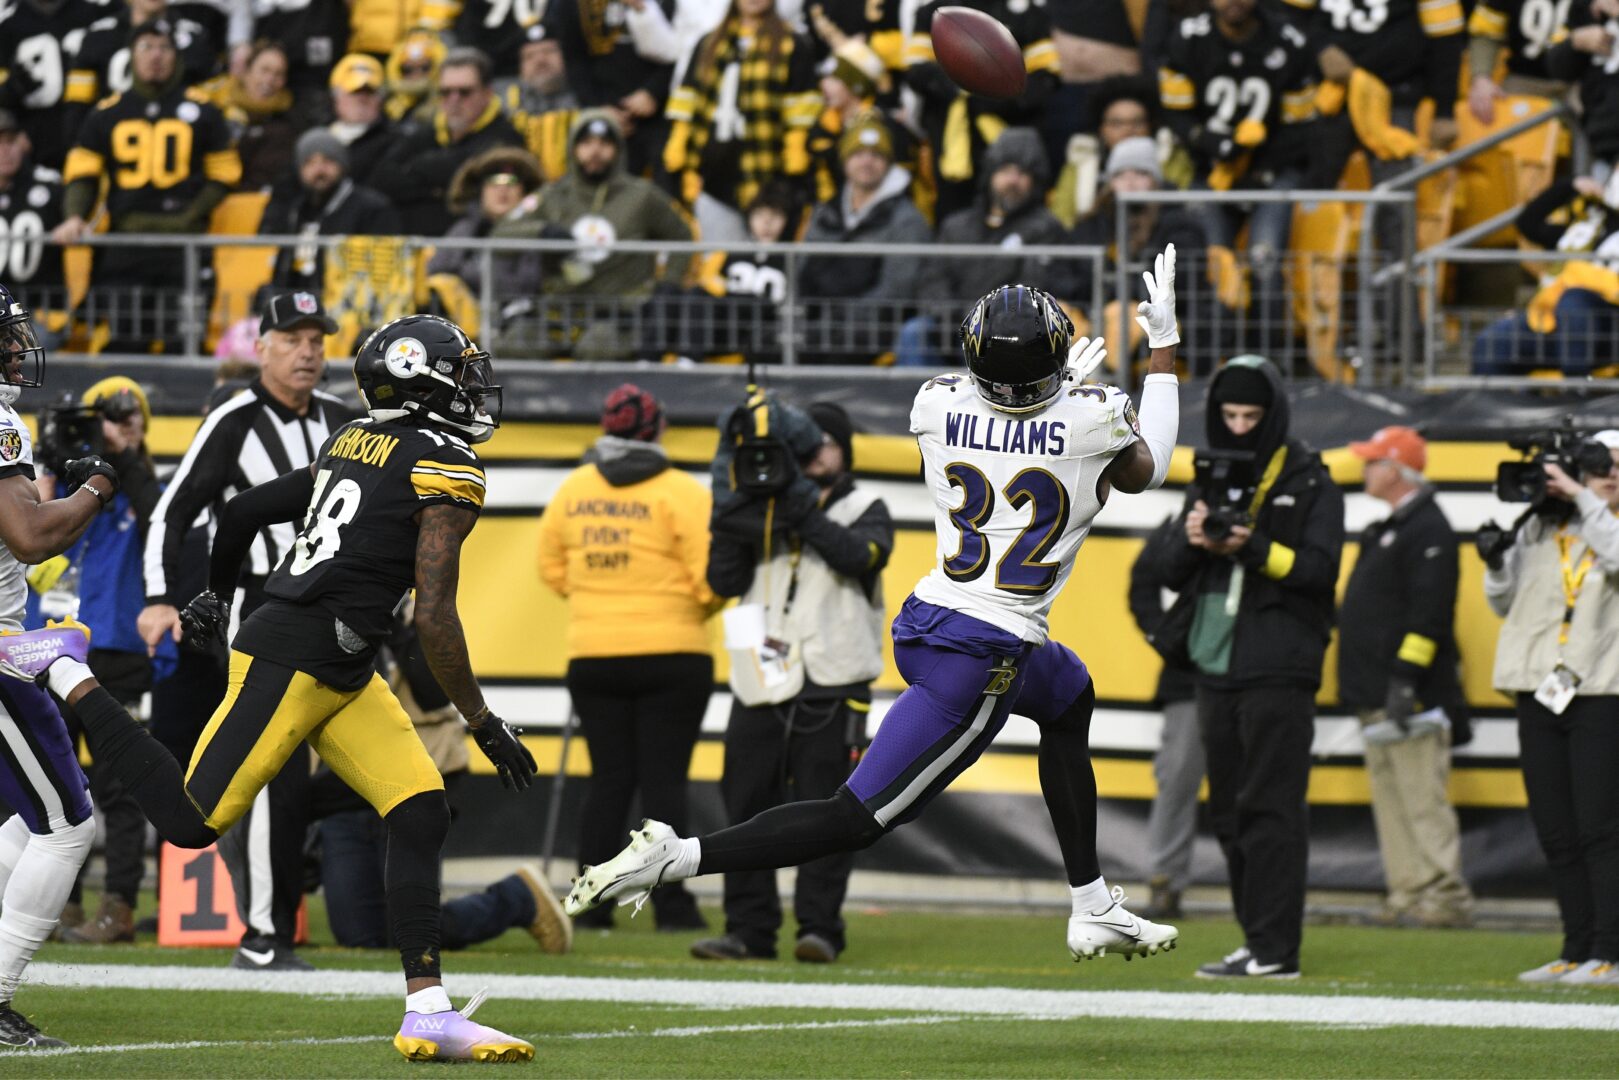 Missed opportunities haunt Steelers in loss to Ravens | WITF